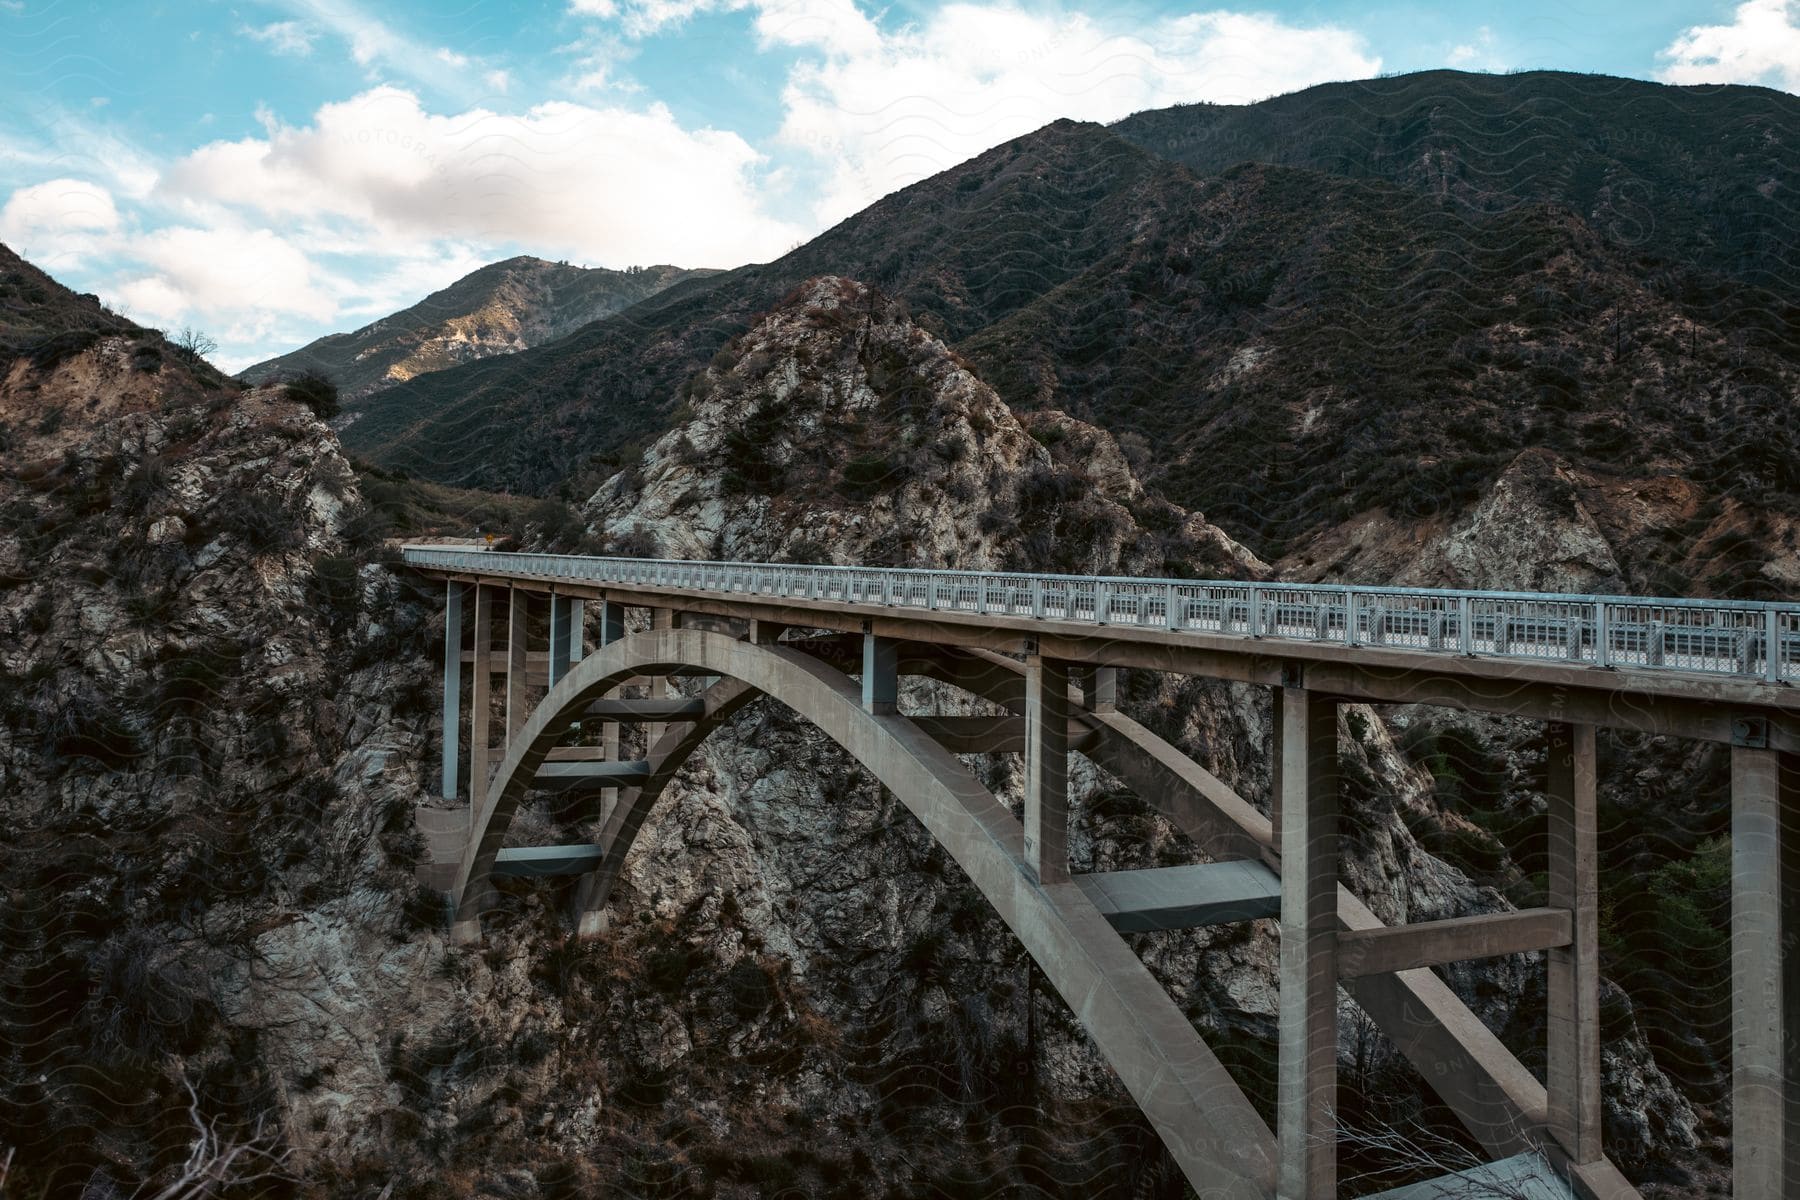 A bridge stretches across a mountain valley and into the mountains in the outdoors during the day